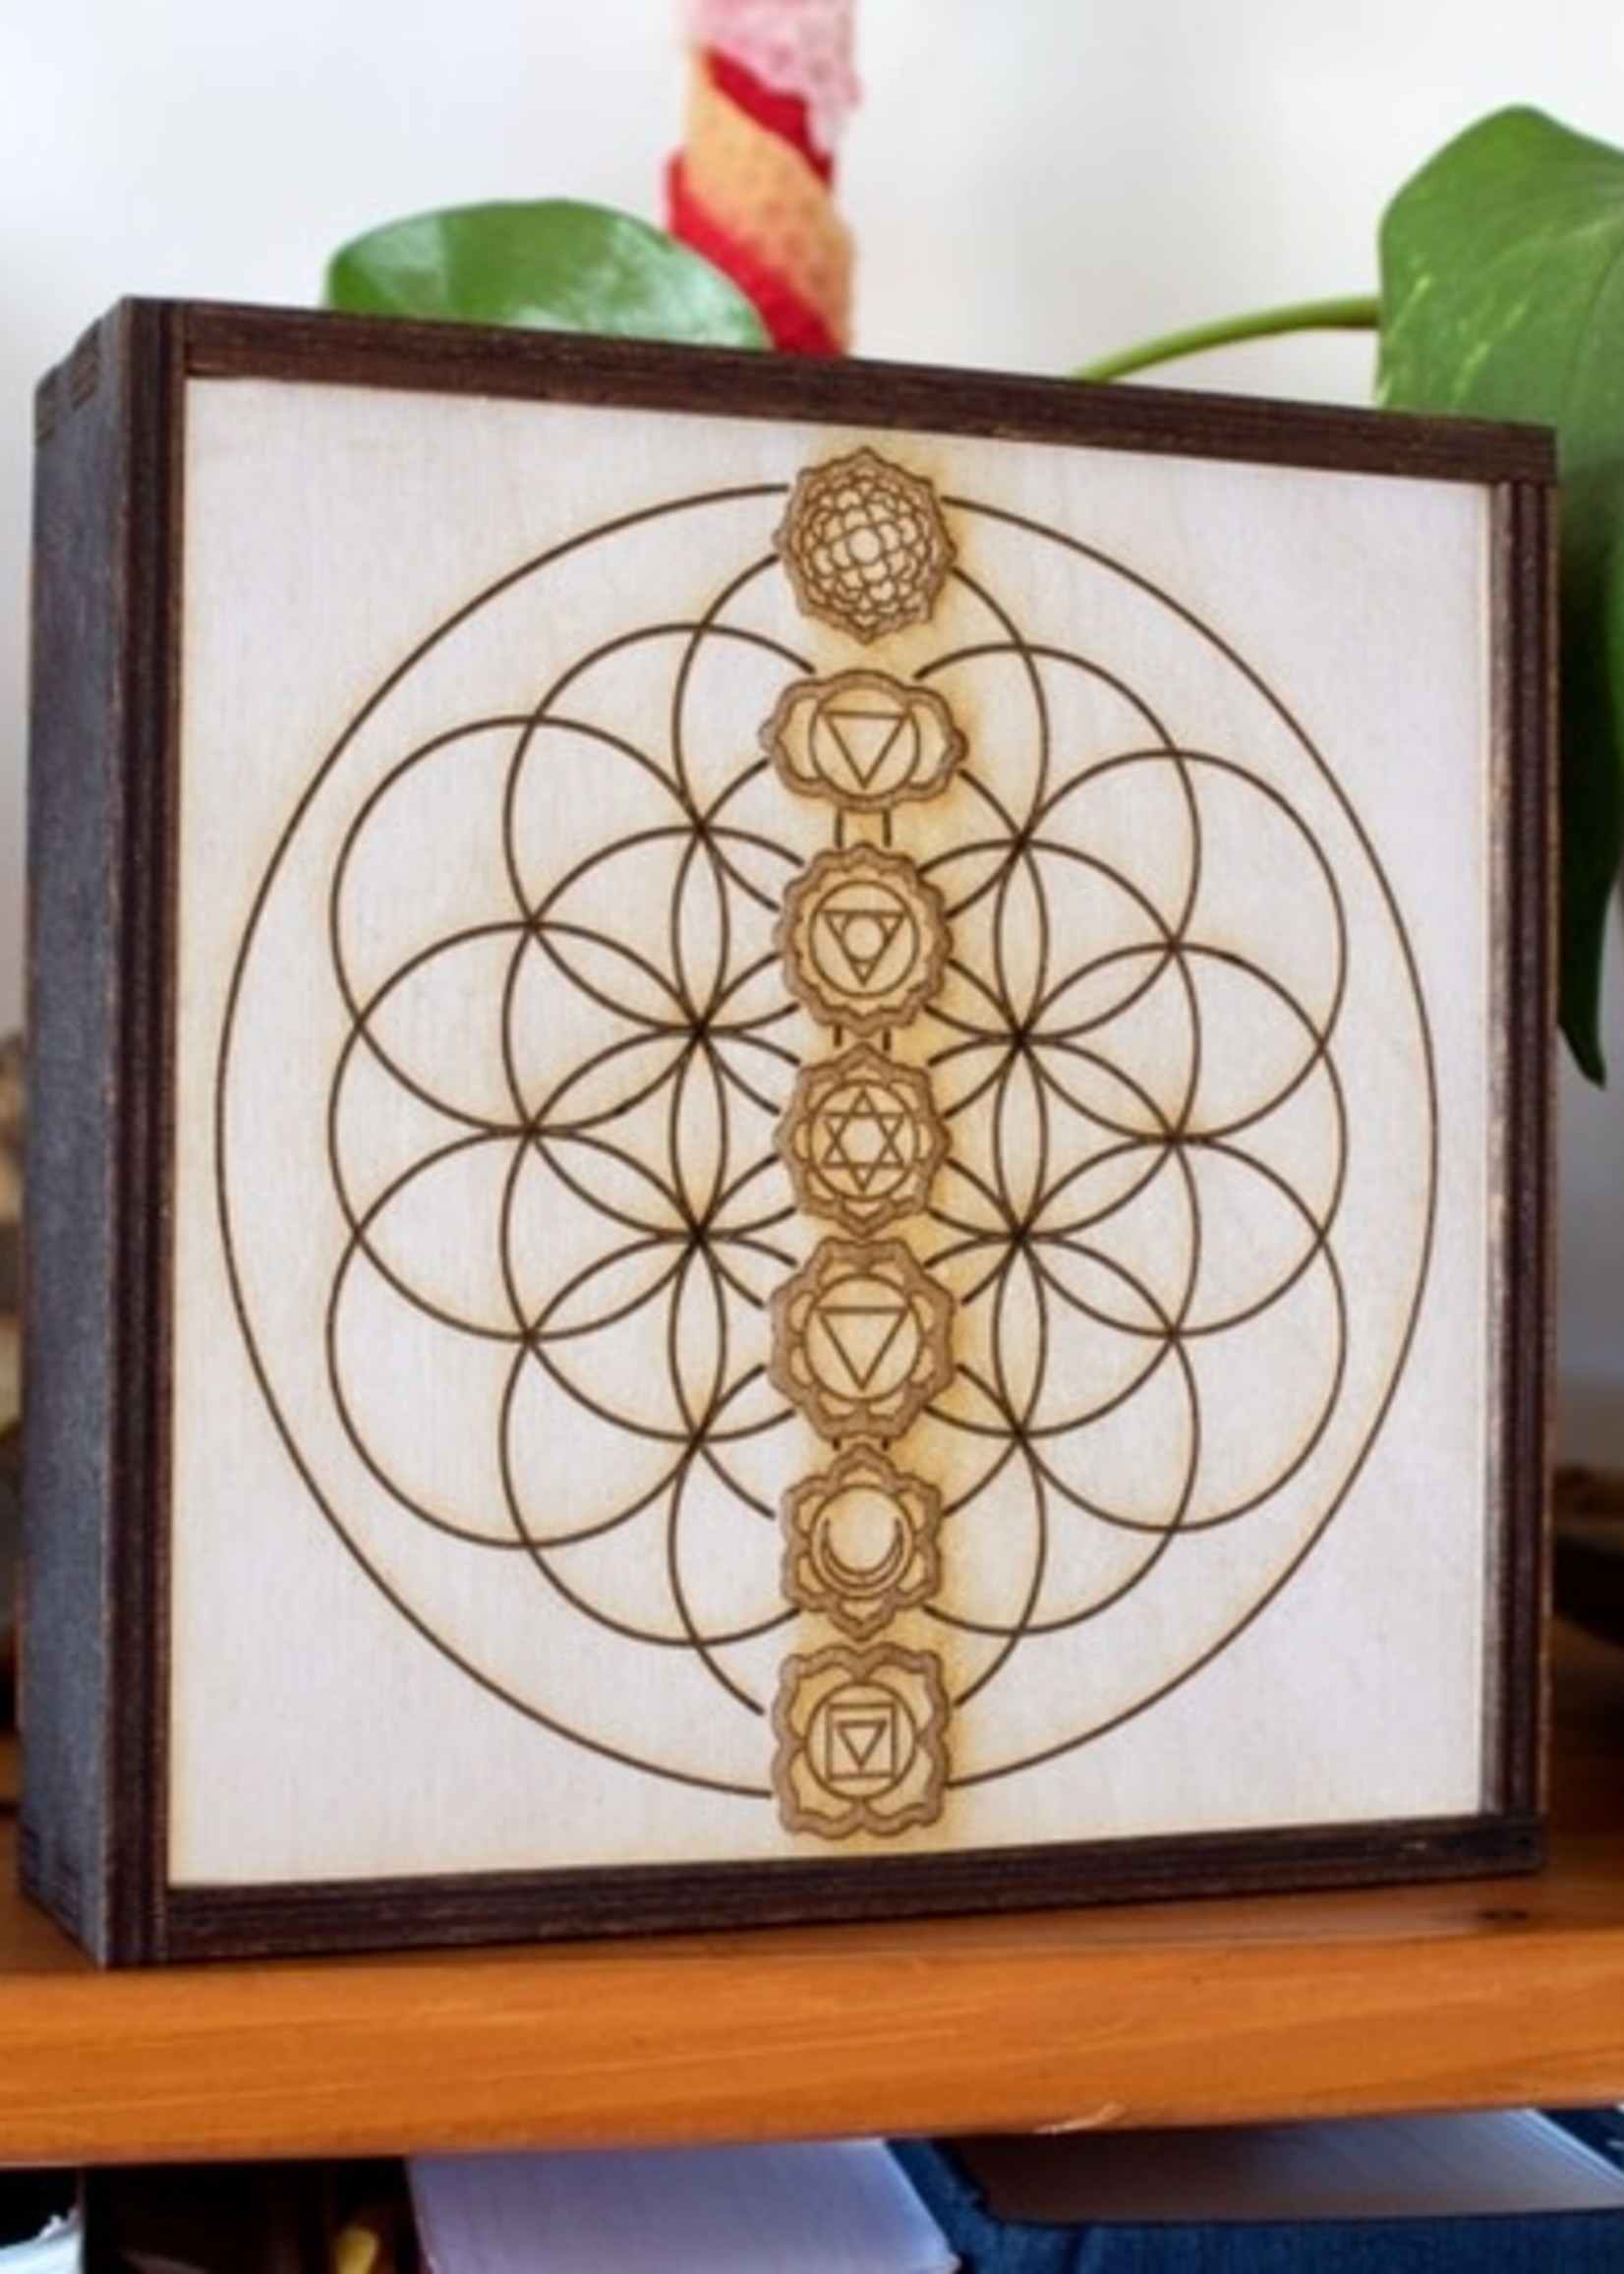 Most Amazing Boxes: Chakra Crystal Grid 6x6